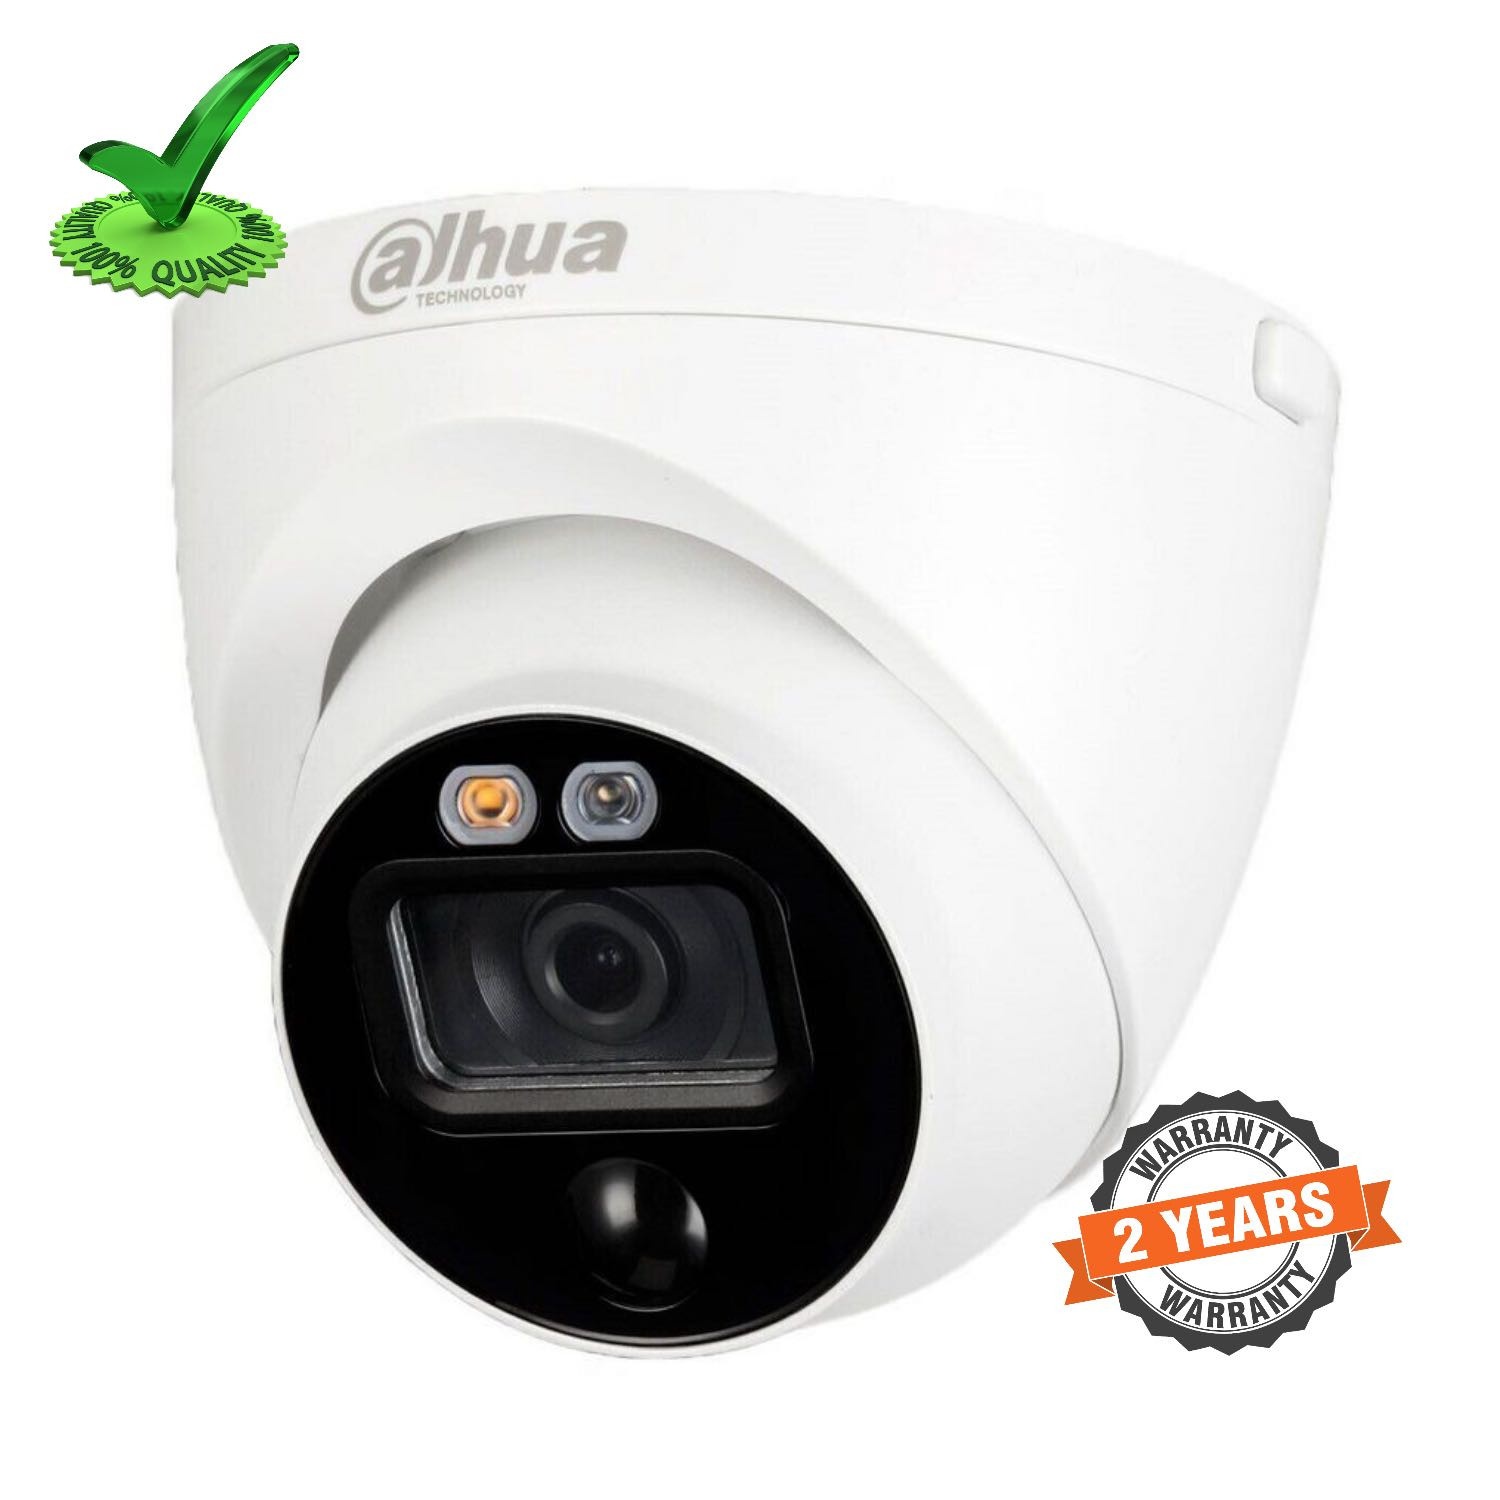 Dahua DH-HAC-ME1200EP-LED 2MP Security Active Deterrence Camera